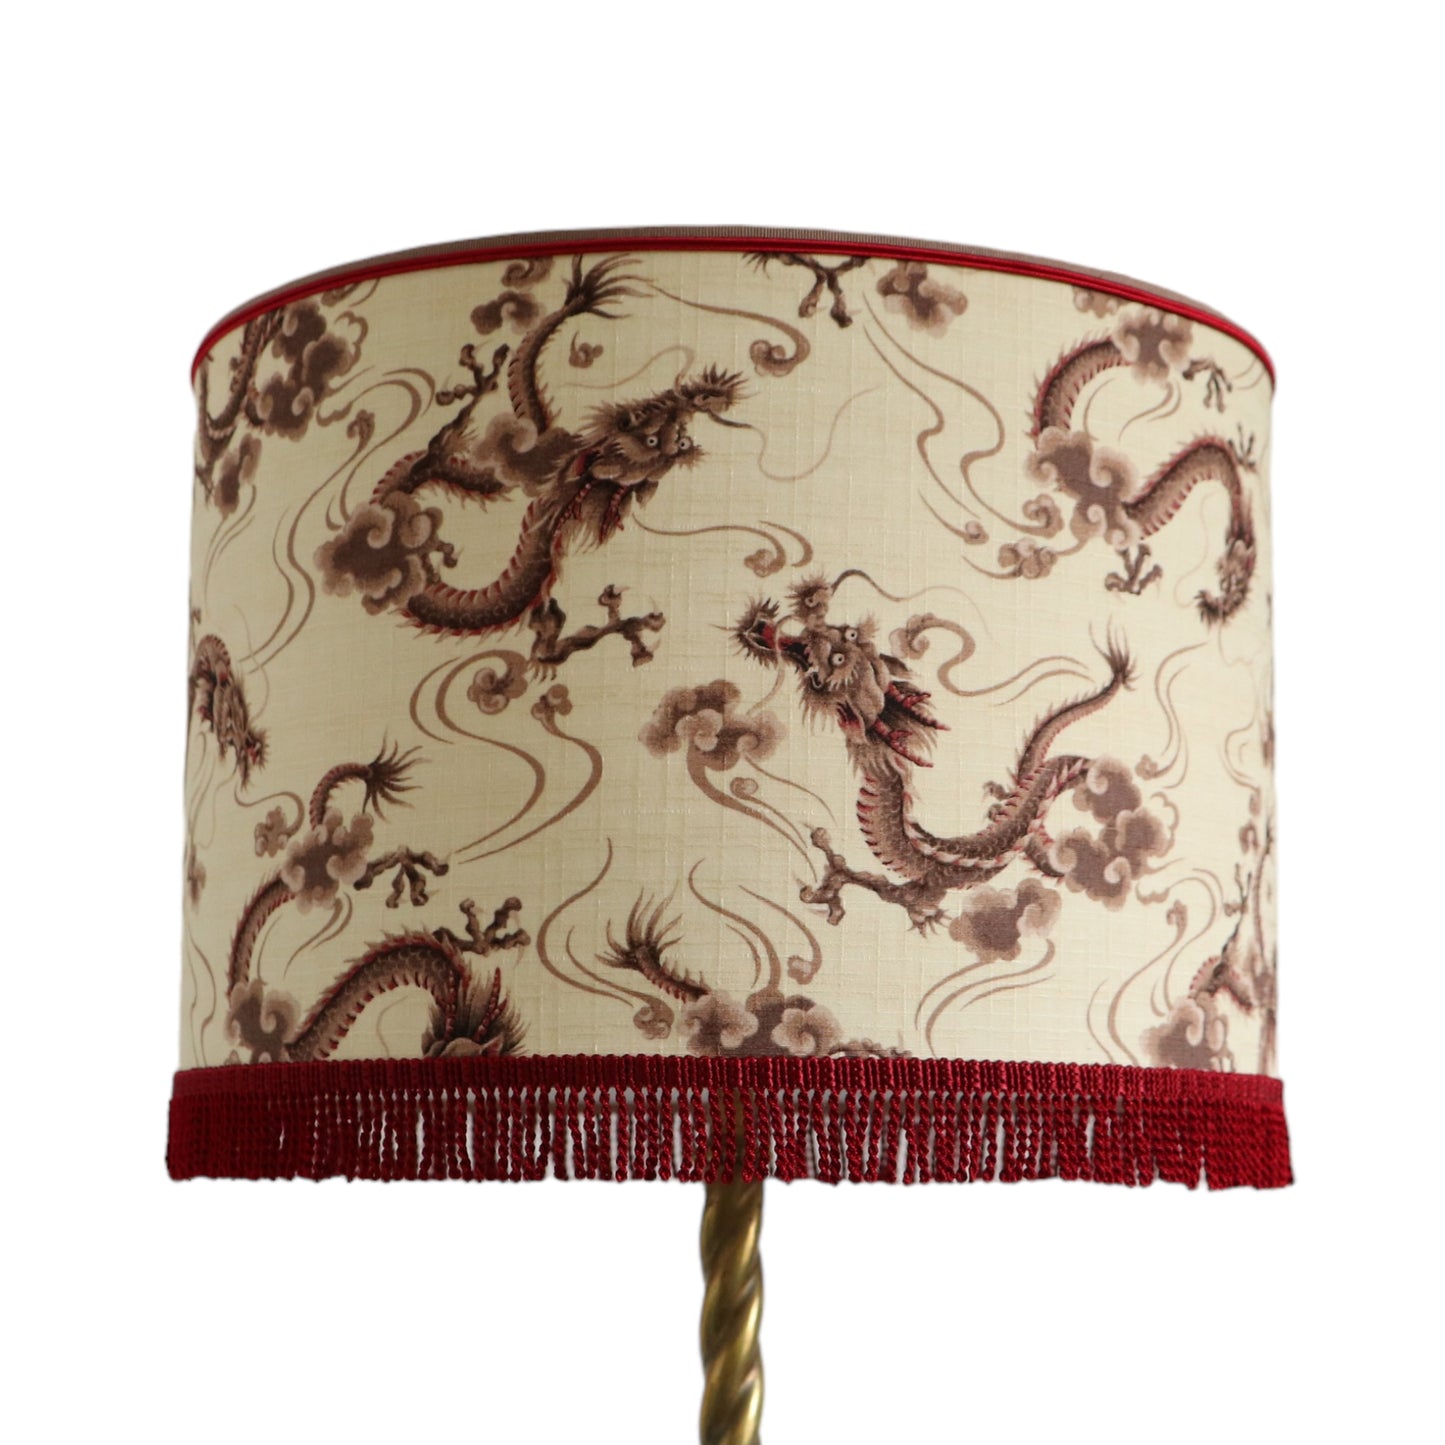 DRAGONS lampshade laminated in Japanese fabric, ref D1